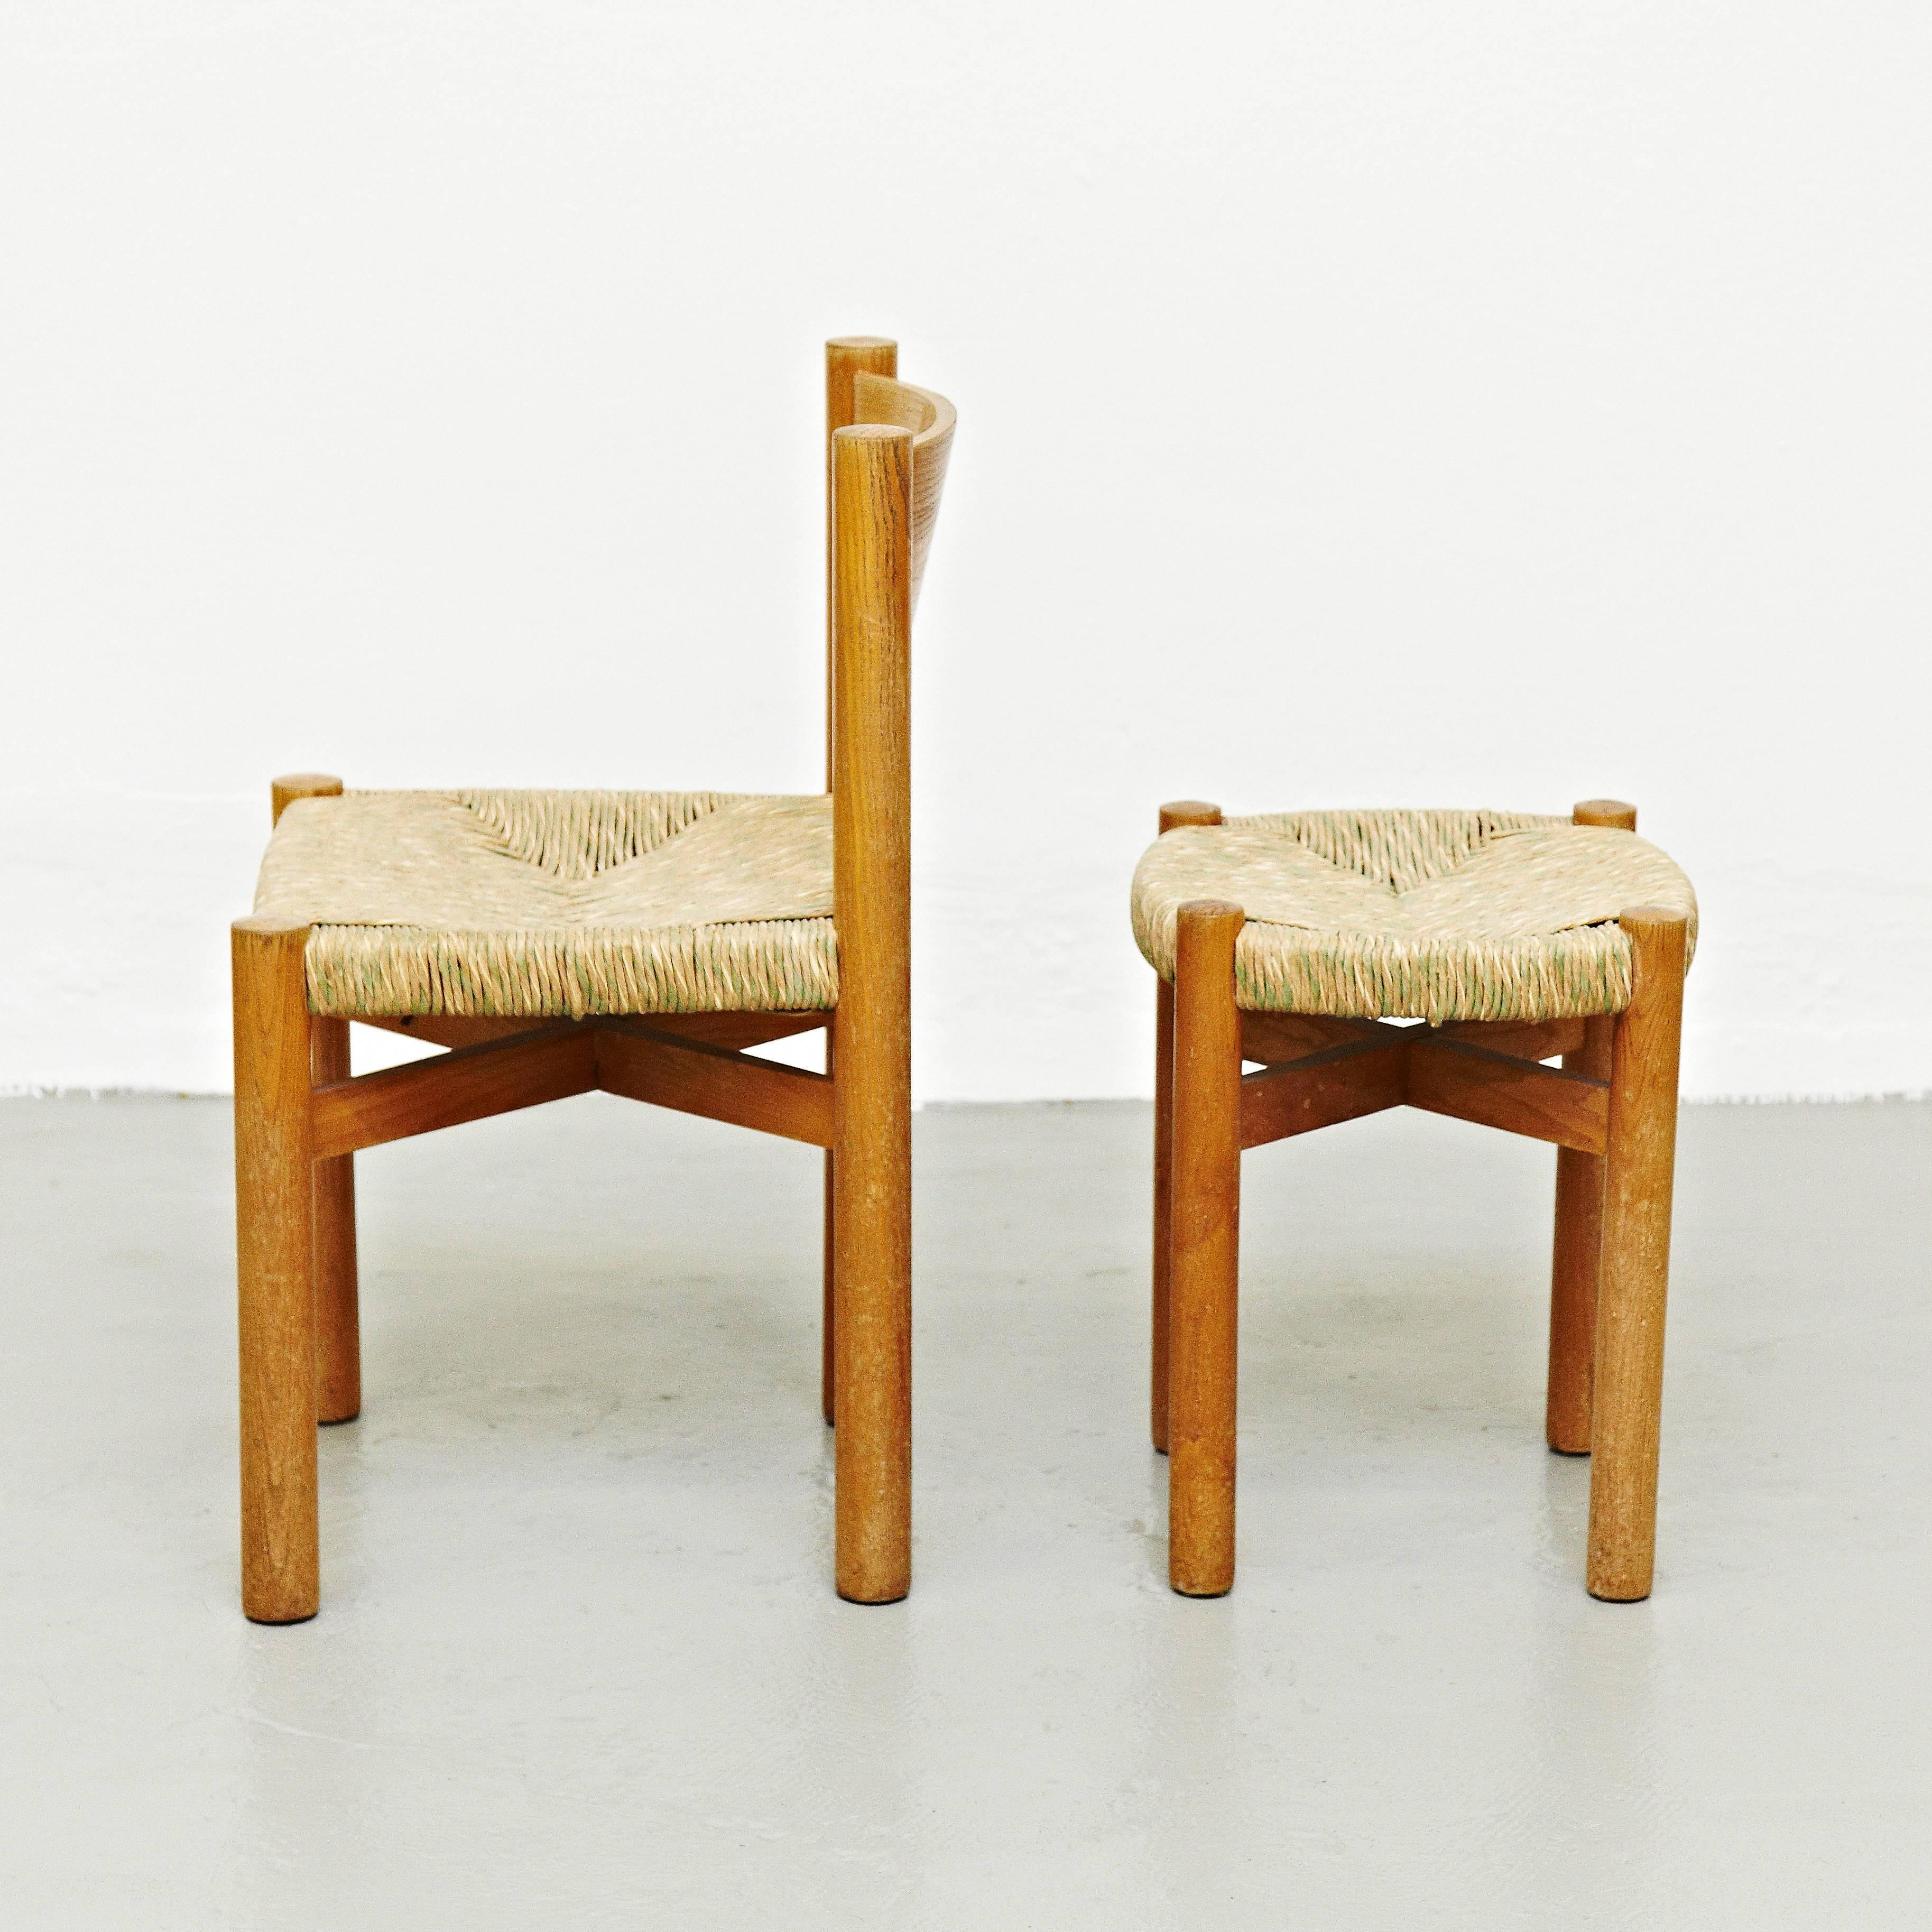 Chair and stool, model meribel, designed by Charlotte Perriand, circa 1950, manufactured in France.

Wood and rattan.

In good original condition, with minor wear consistent with age and use, preserving a beautiful patina.

Charlotte Perriand